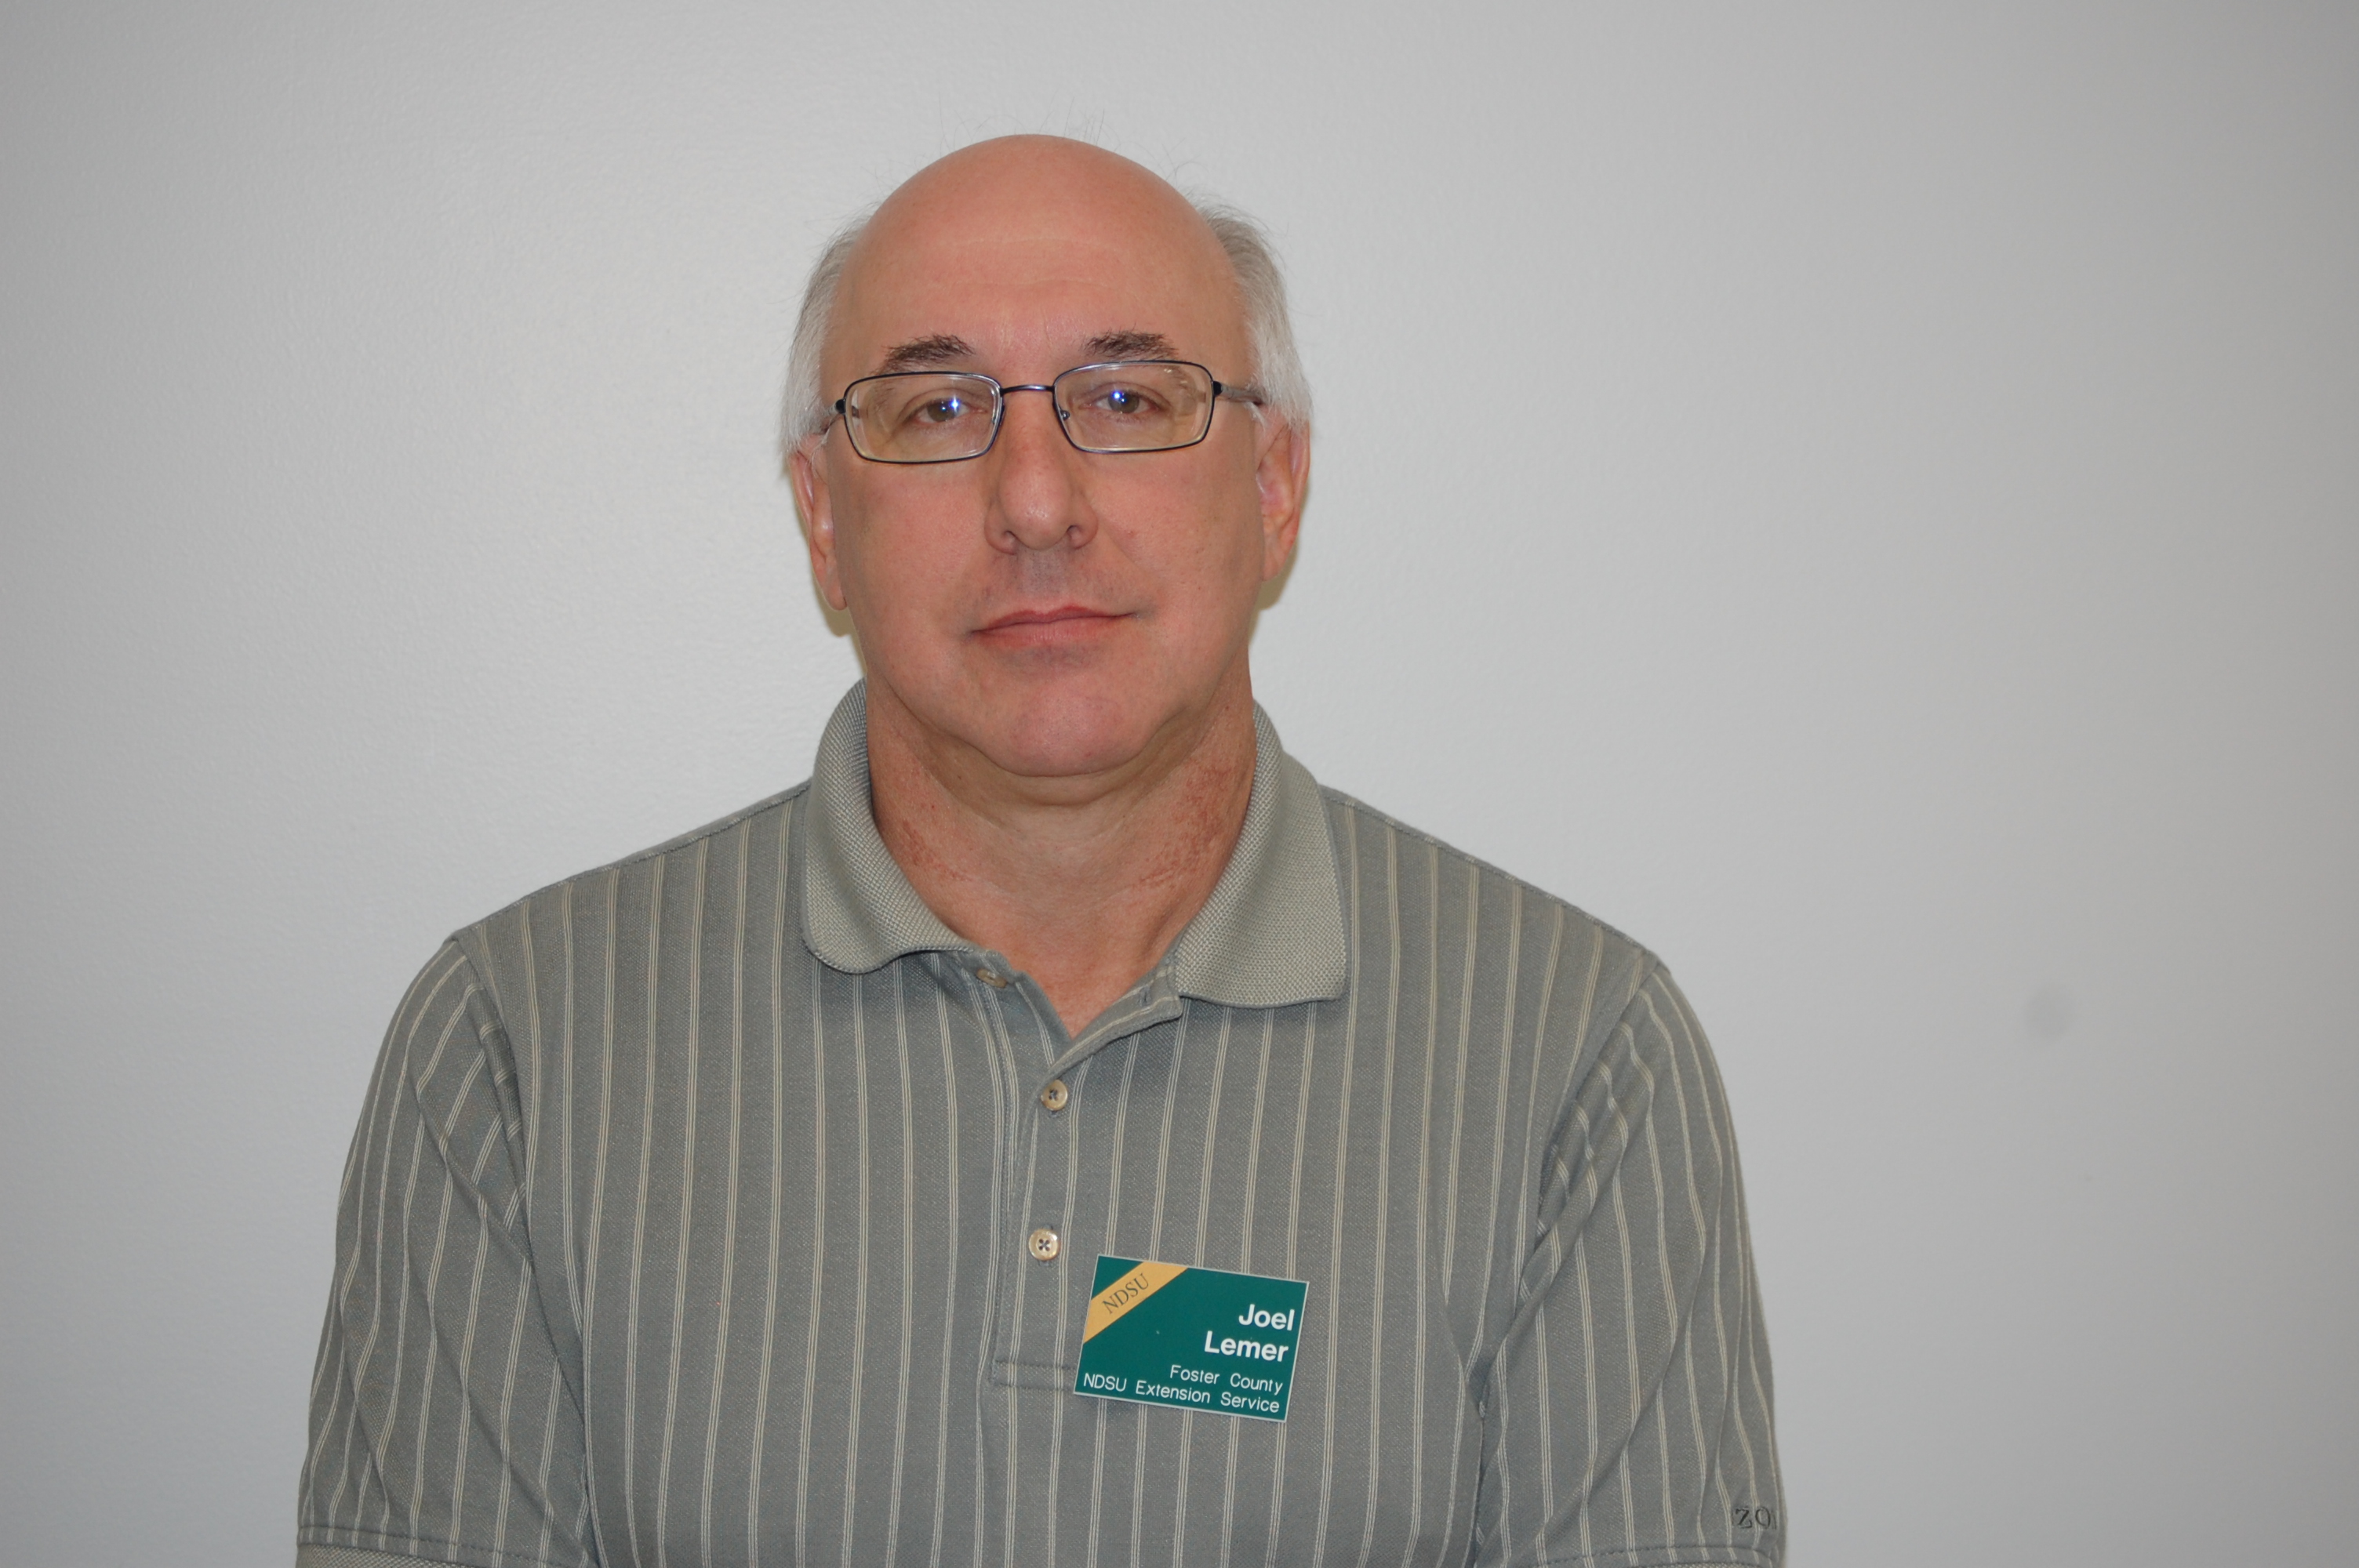 Joel Lemer, Extension agent for Foster County (NDSU photo)